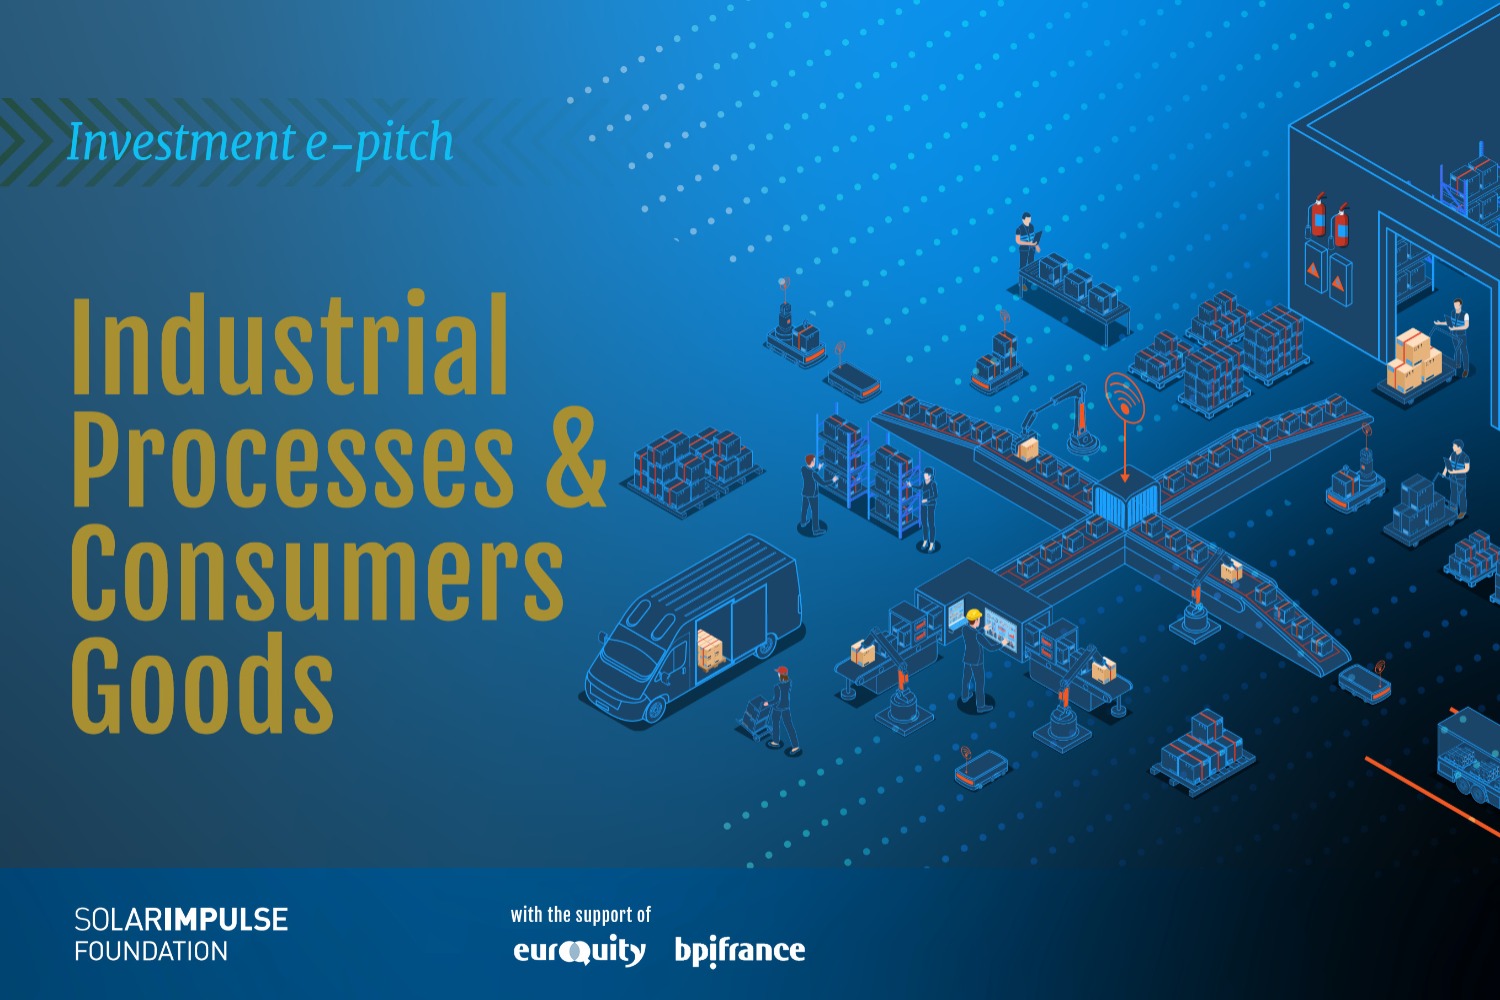 Industrial Processes & Consumer Goods investment e-pitch